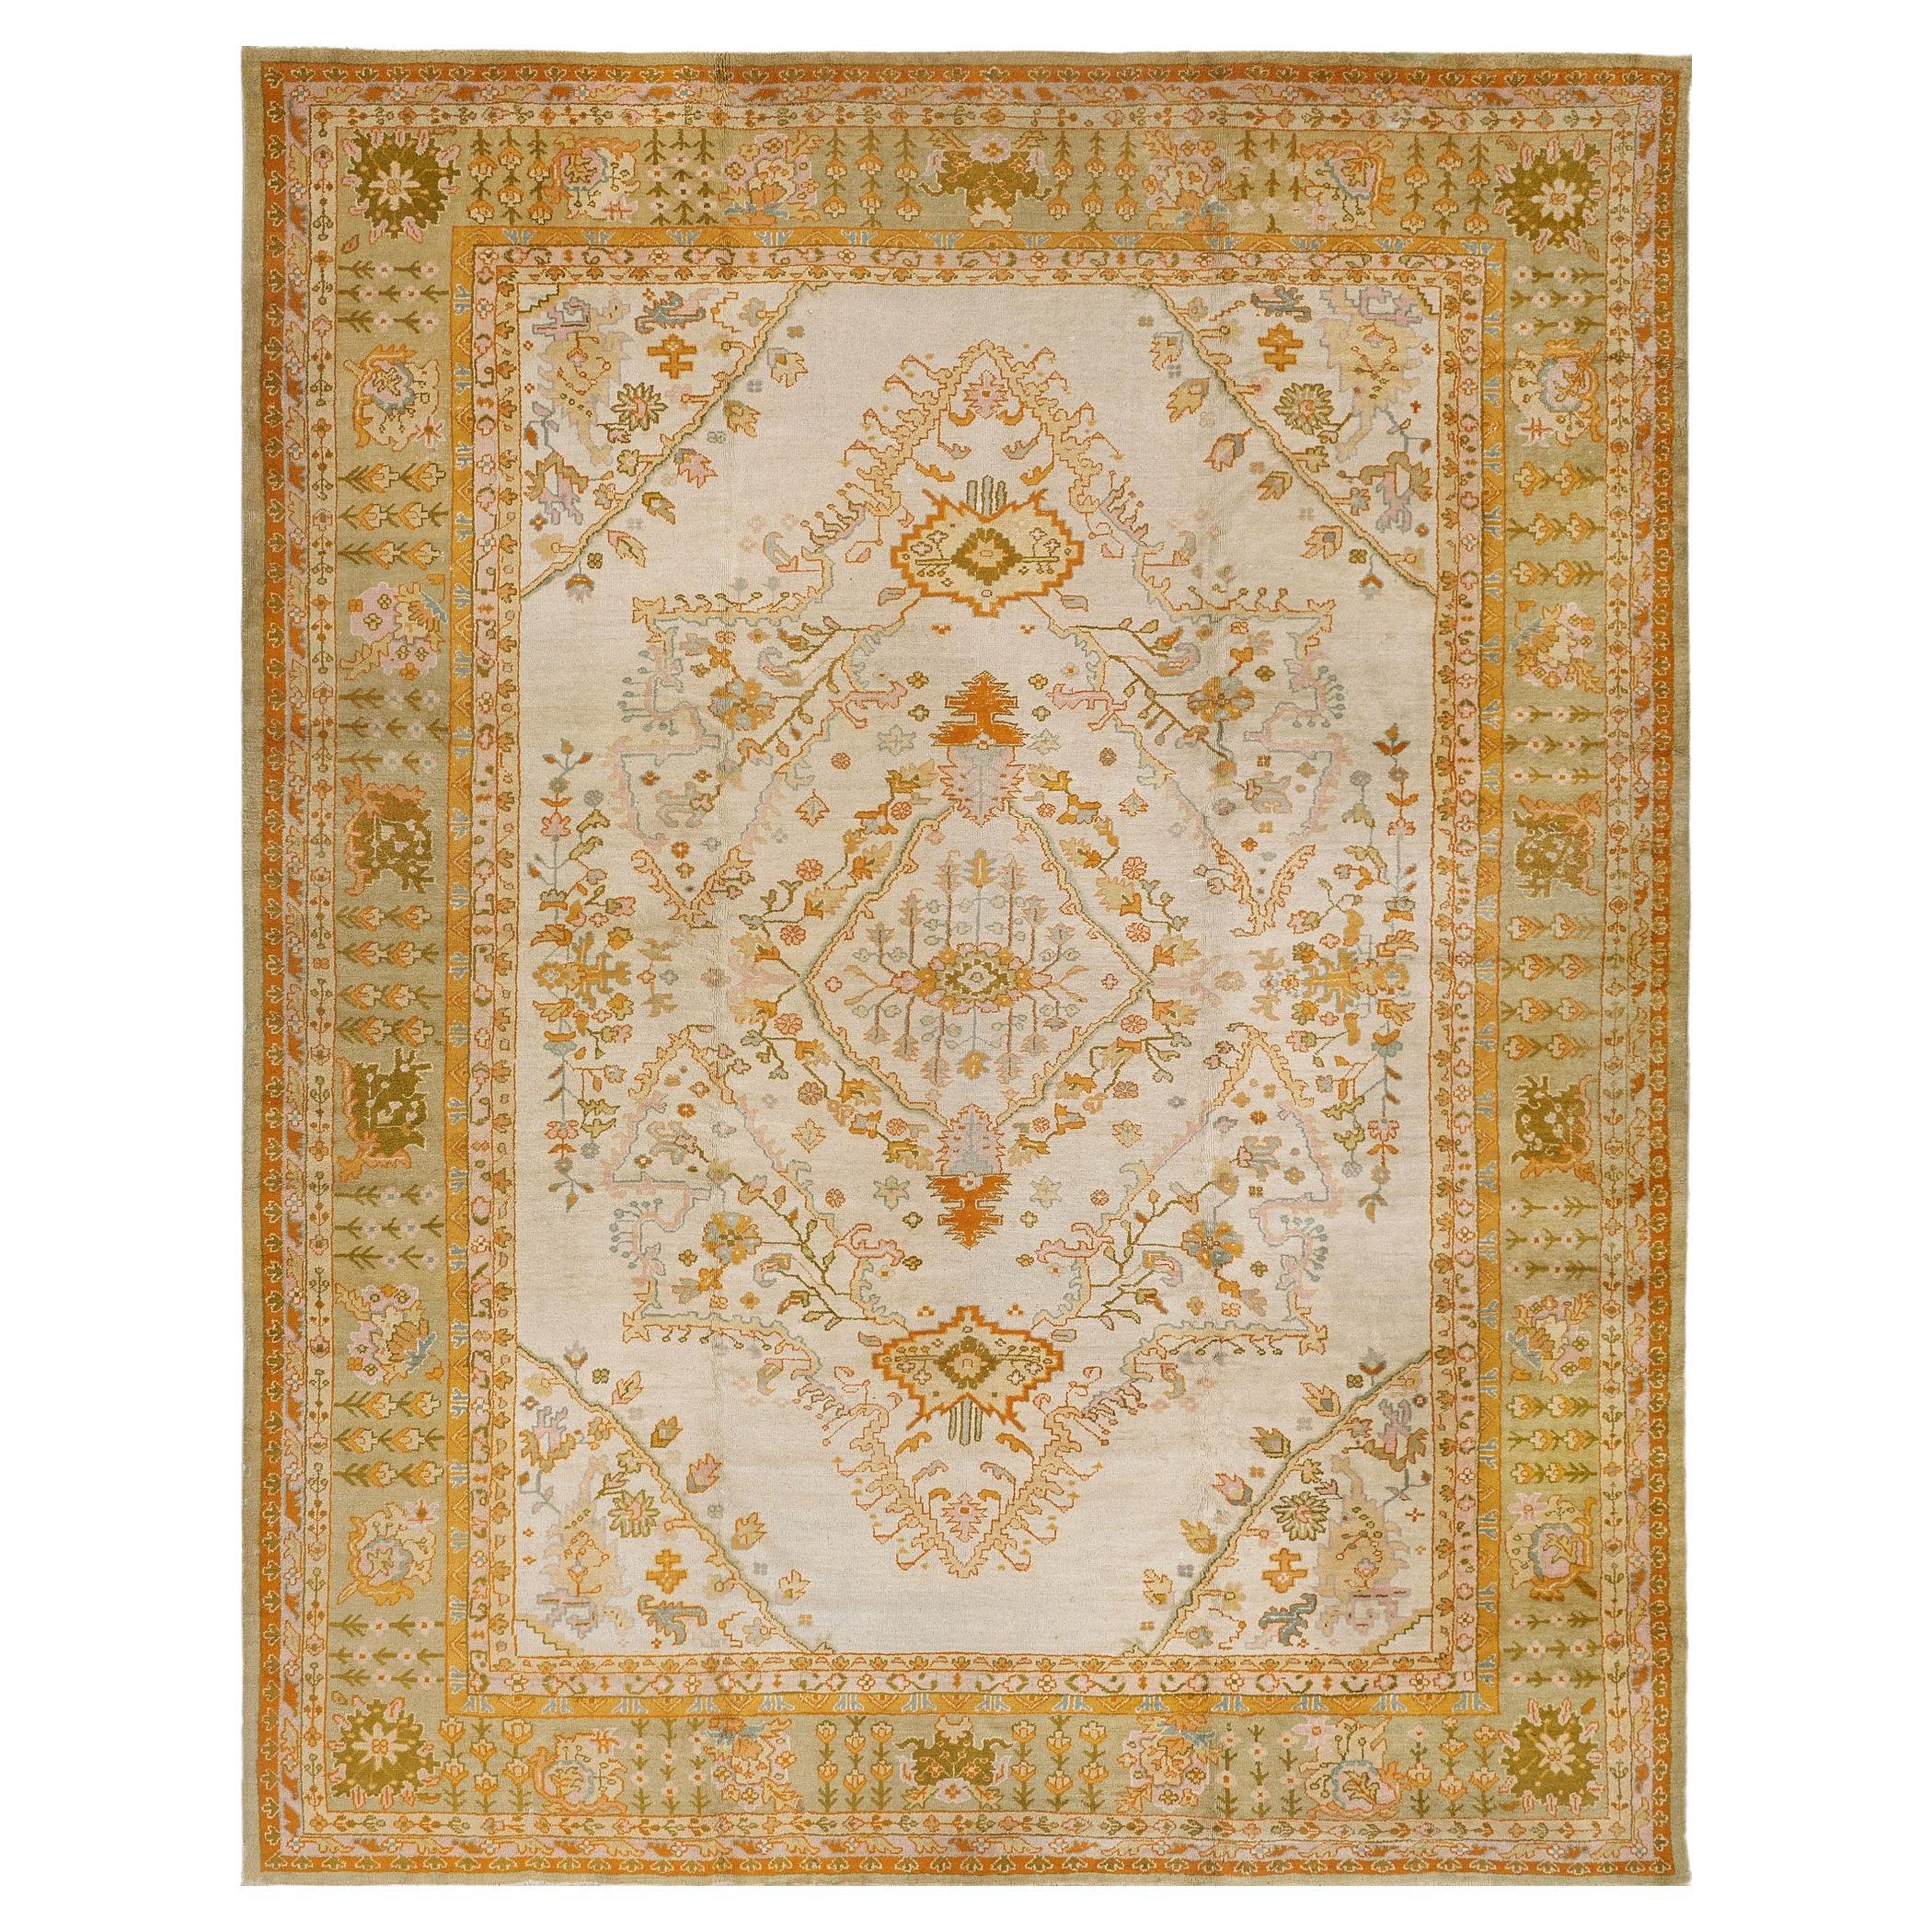 Oversized Hand-knotted Wool Antique Floral Turkish Oushak Rug